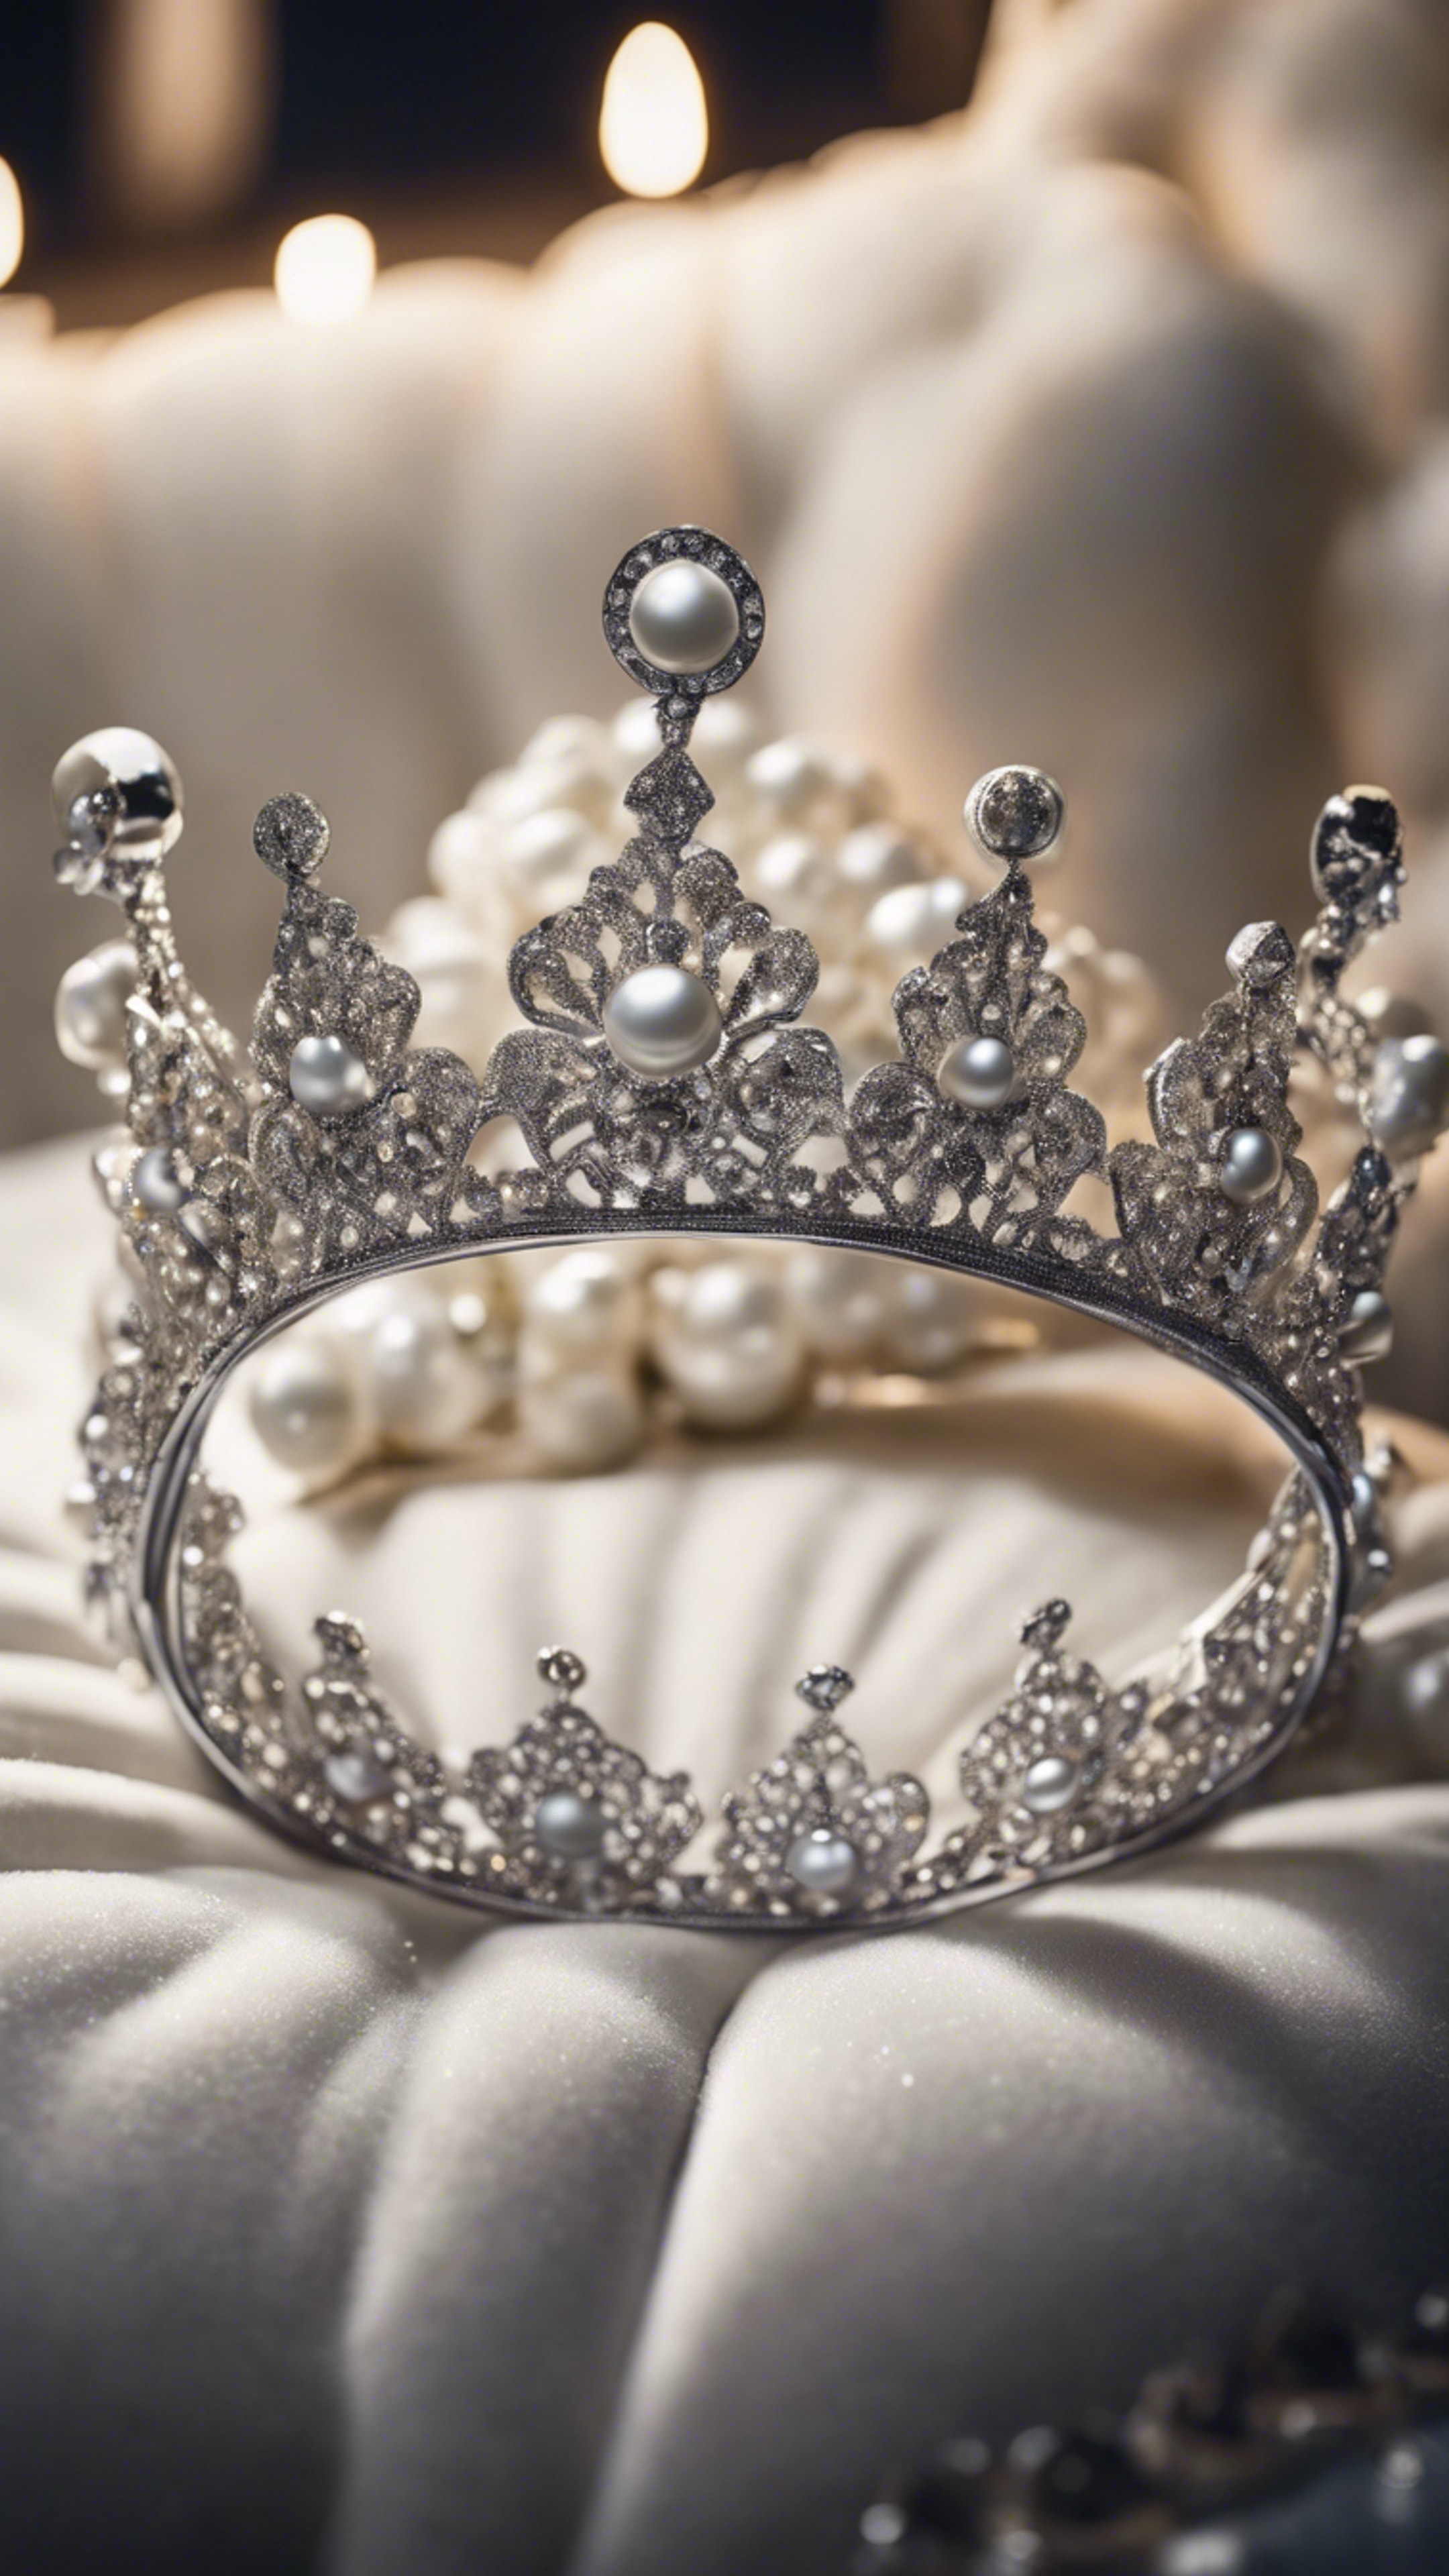 A classic silver crown embellished with pearls and diamonds lying on a white velvet cushion at night. ផ្ទាំង​រូបភាព[f90278dd6b1c4e9ca8cc]